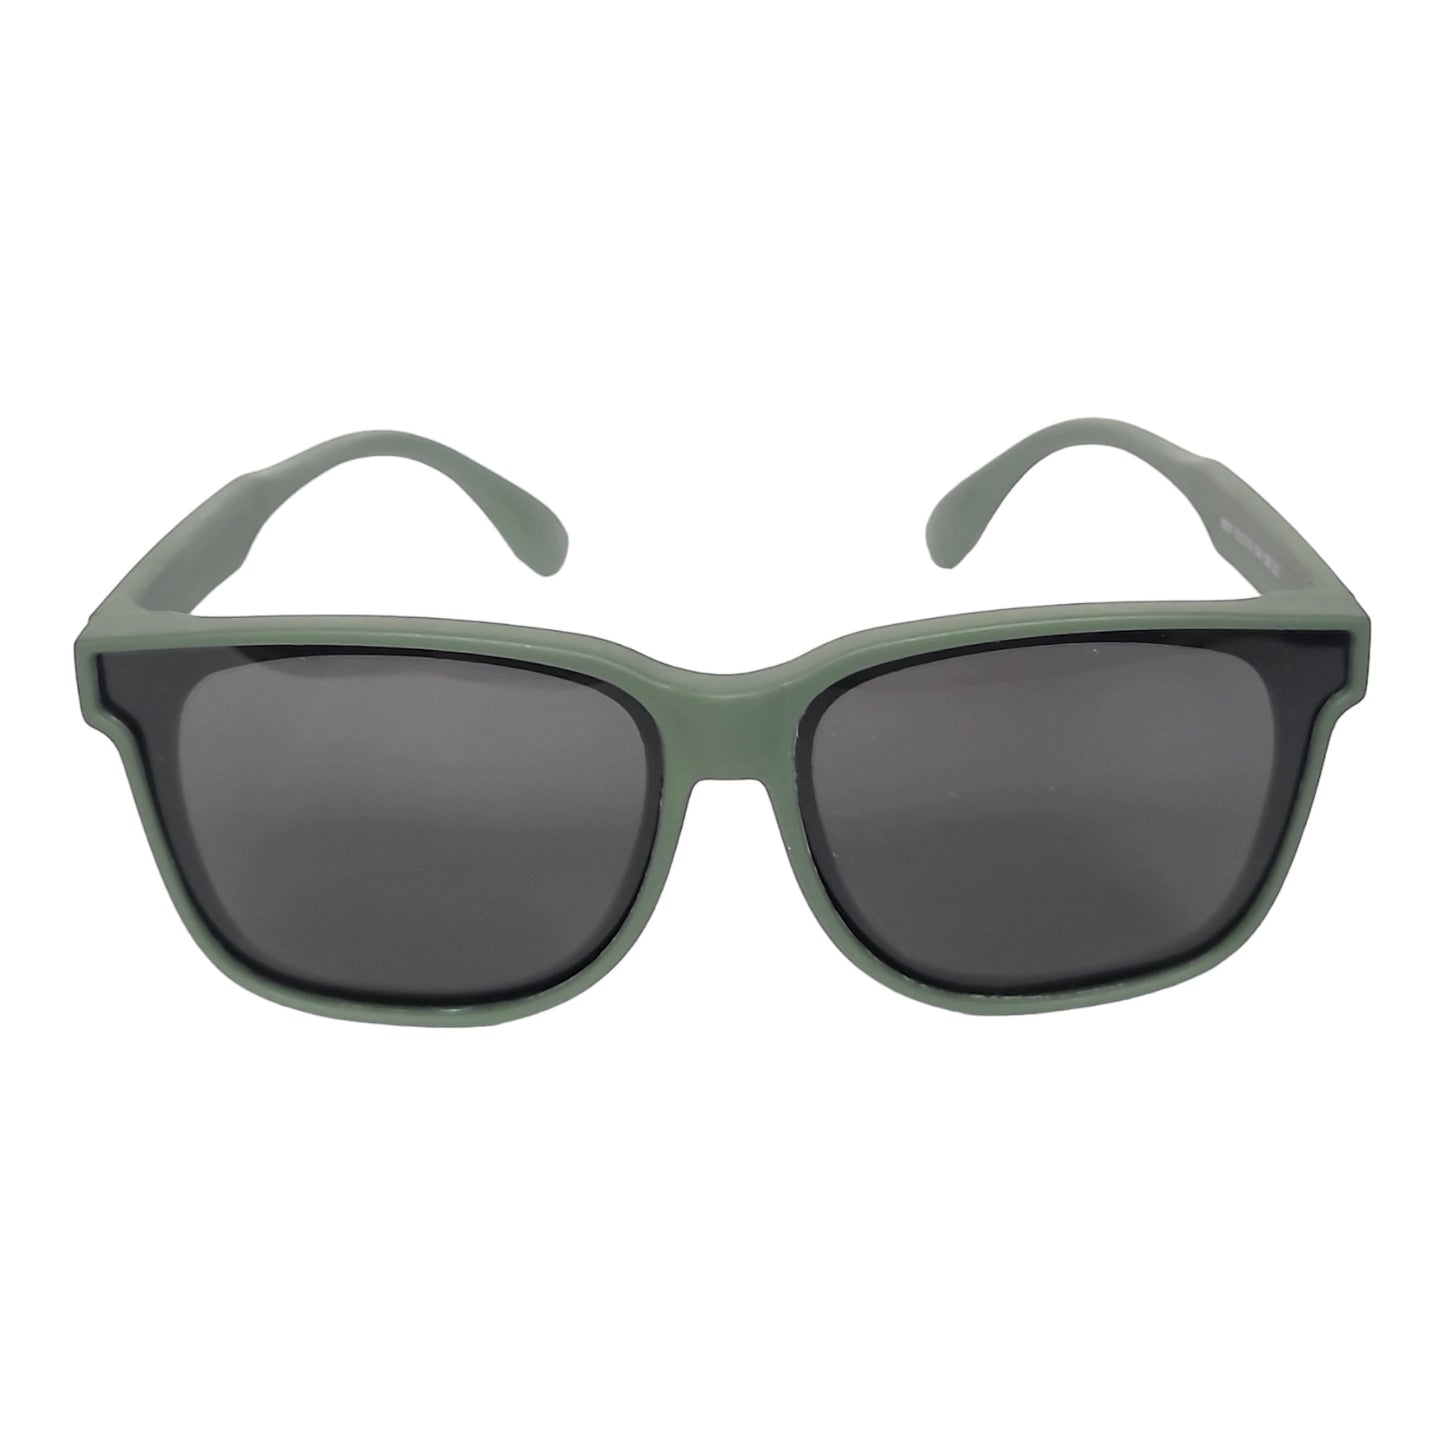 Kids Polarized Sunglasses for Children Age 4-9 Years Old, Girl or Boy  | affaires-9007-Green